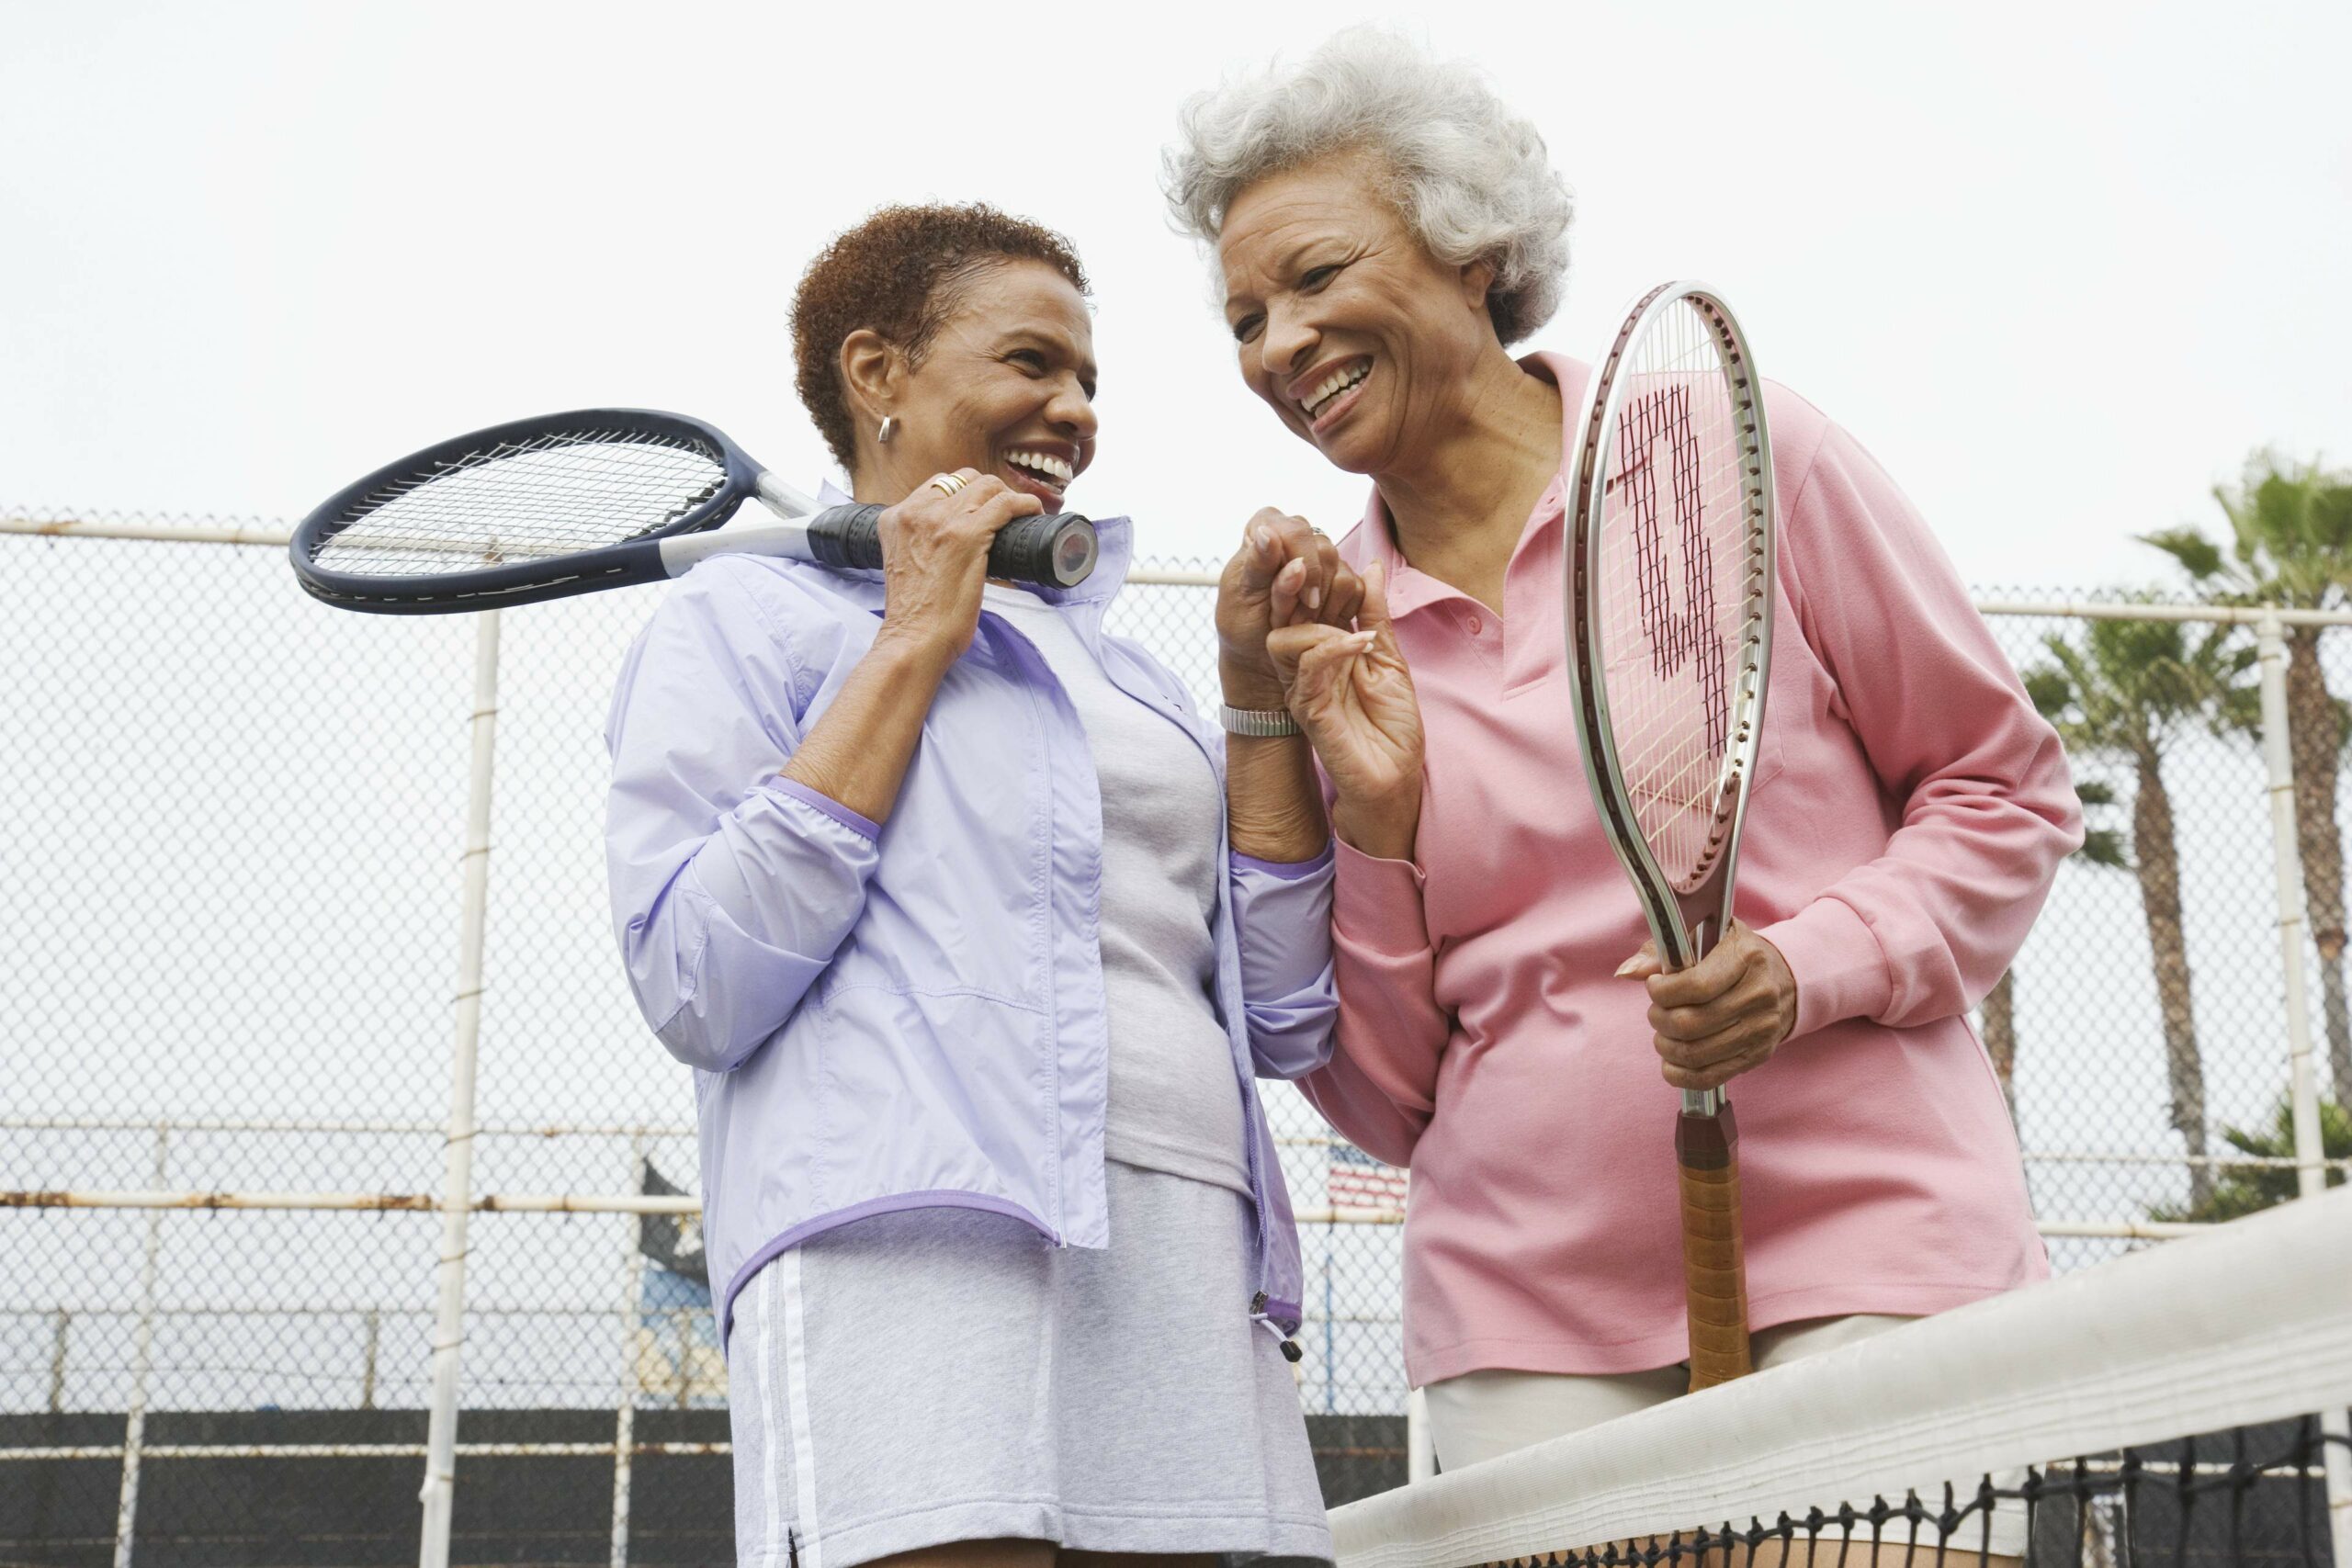 Elderly women hanging out and playing tennis UofL Health